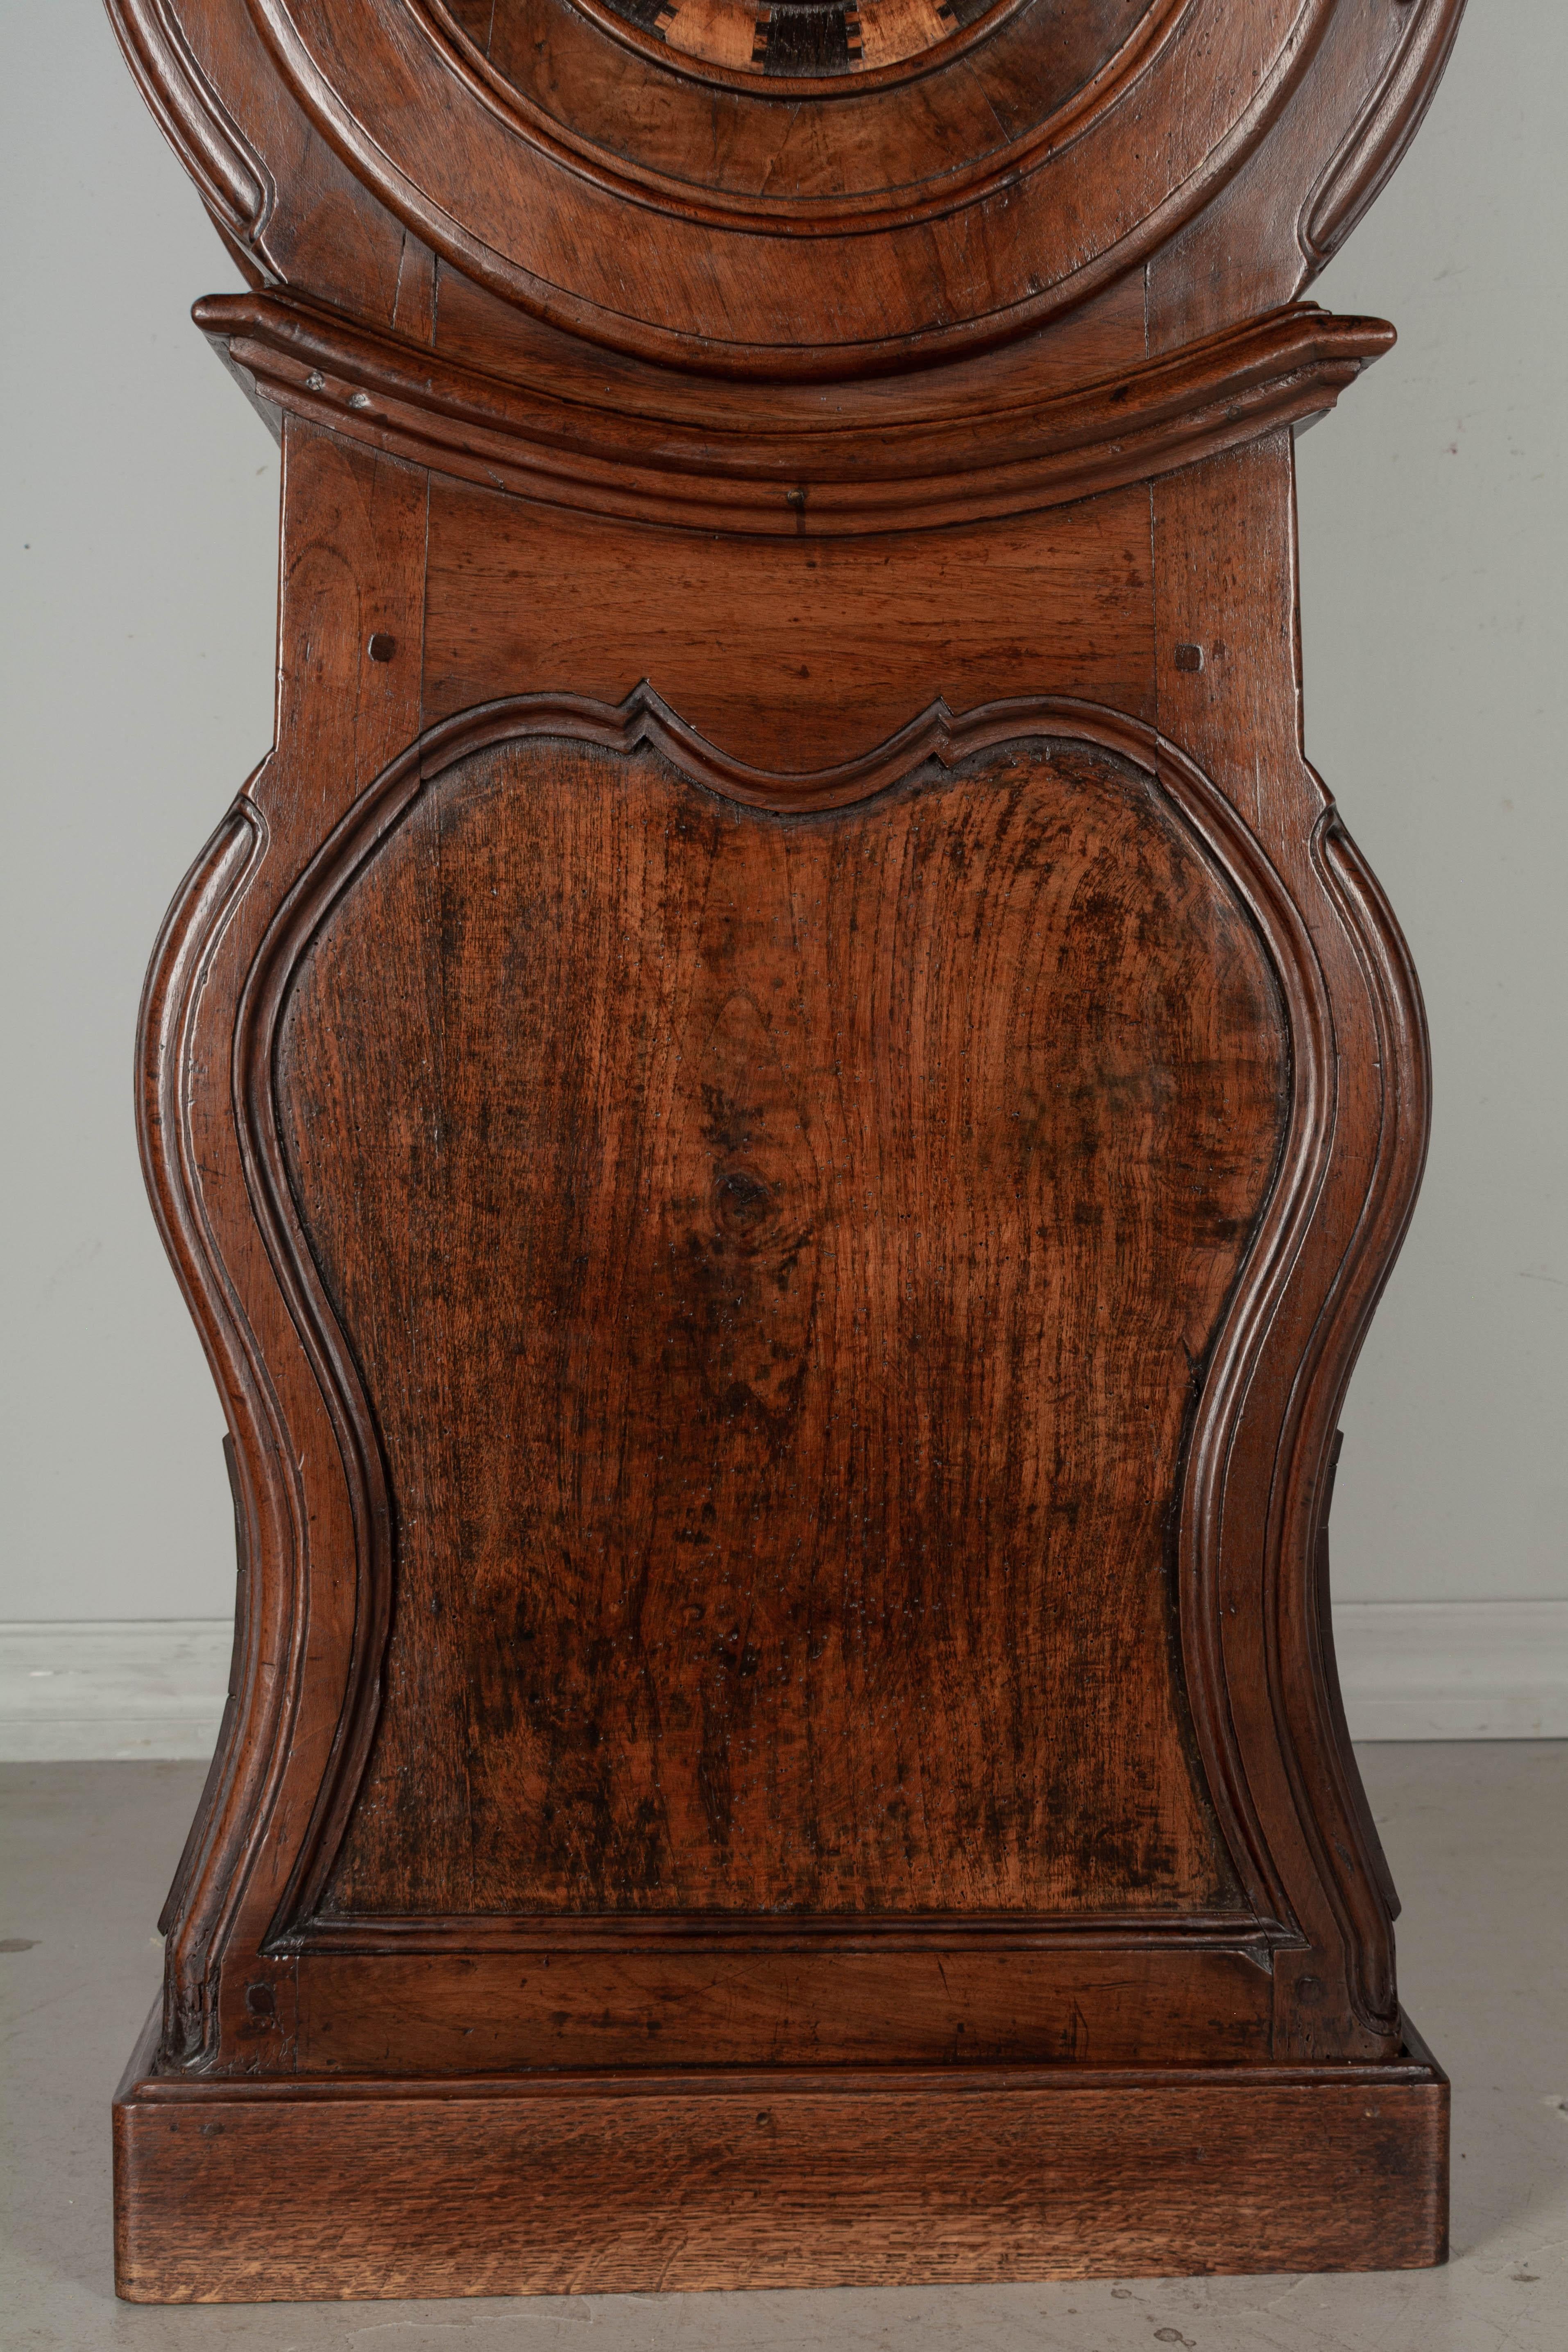 19th Century French Tall Case Clock or Horloge de Parquet In Good Condition For Sale In Winter Park, FL